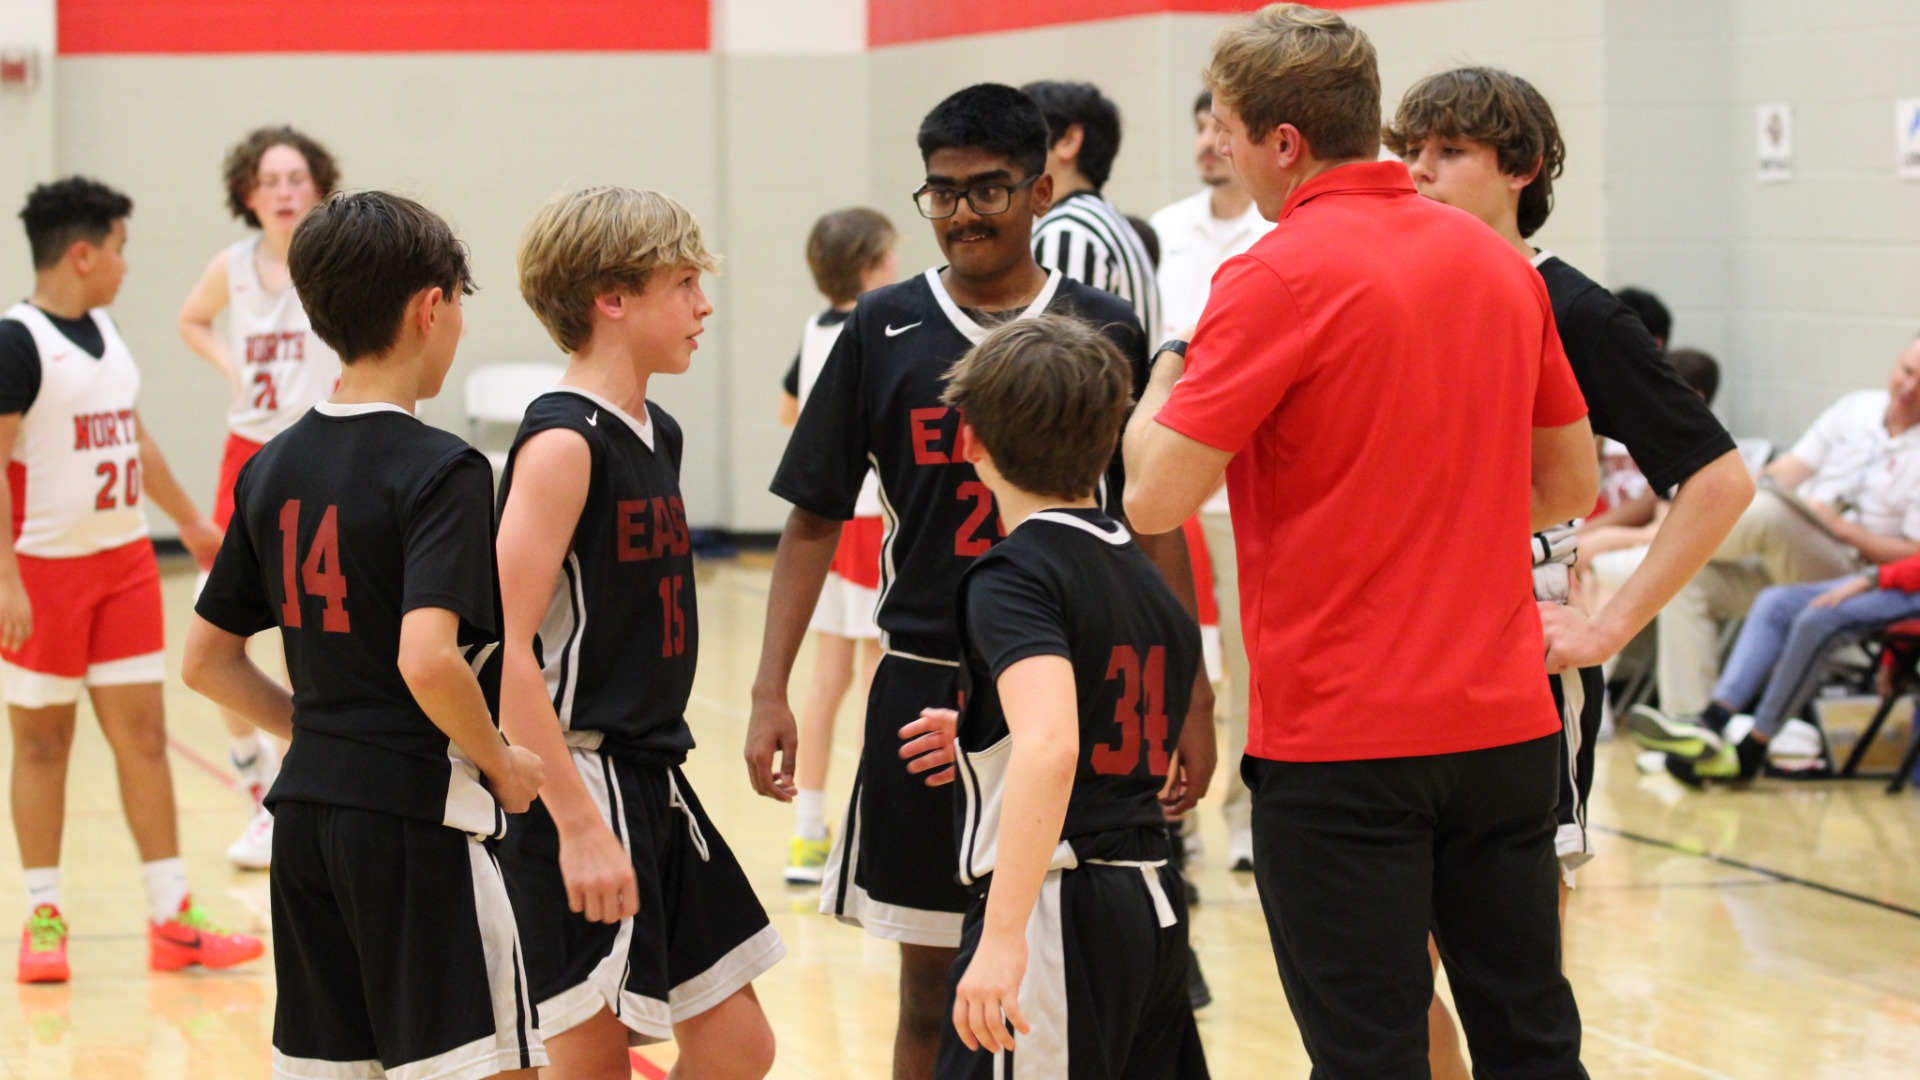 CMS EastSlide 0 - East Dominates Crosstown Rival North Taking All 3 Games in 7th Grade